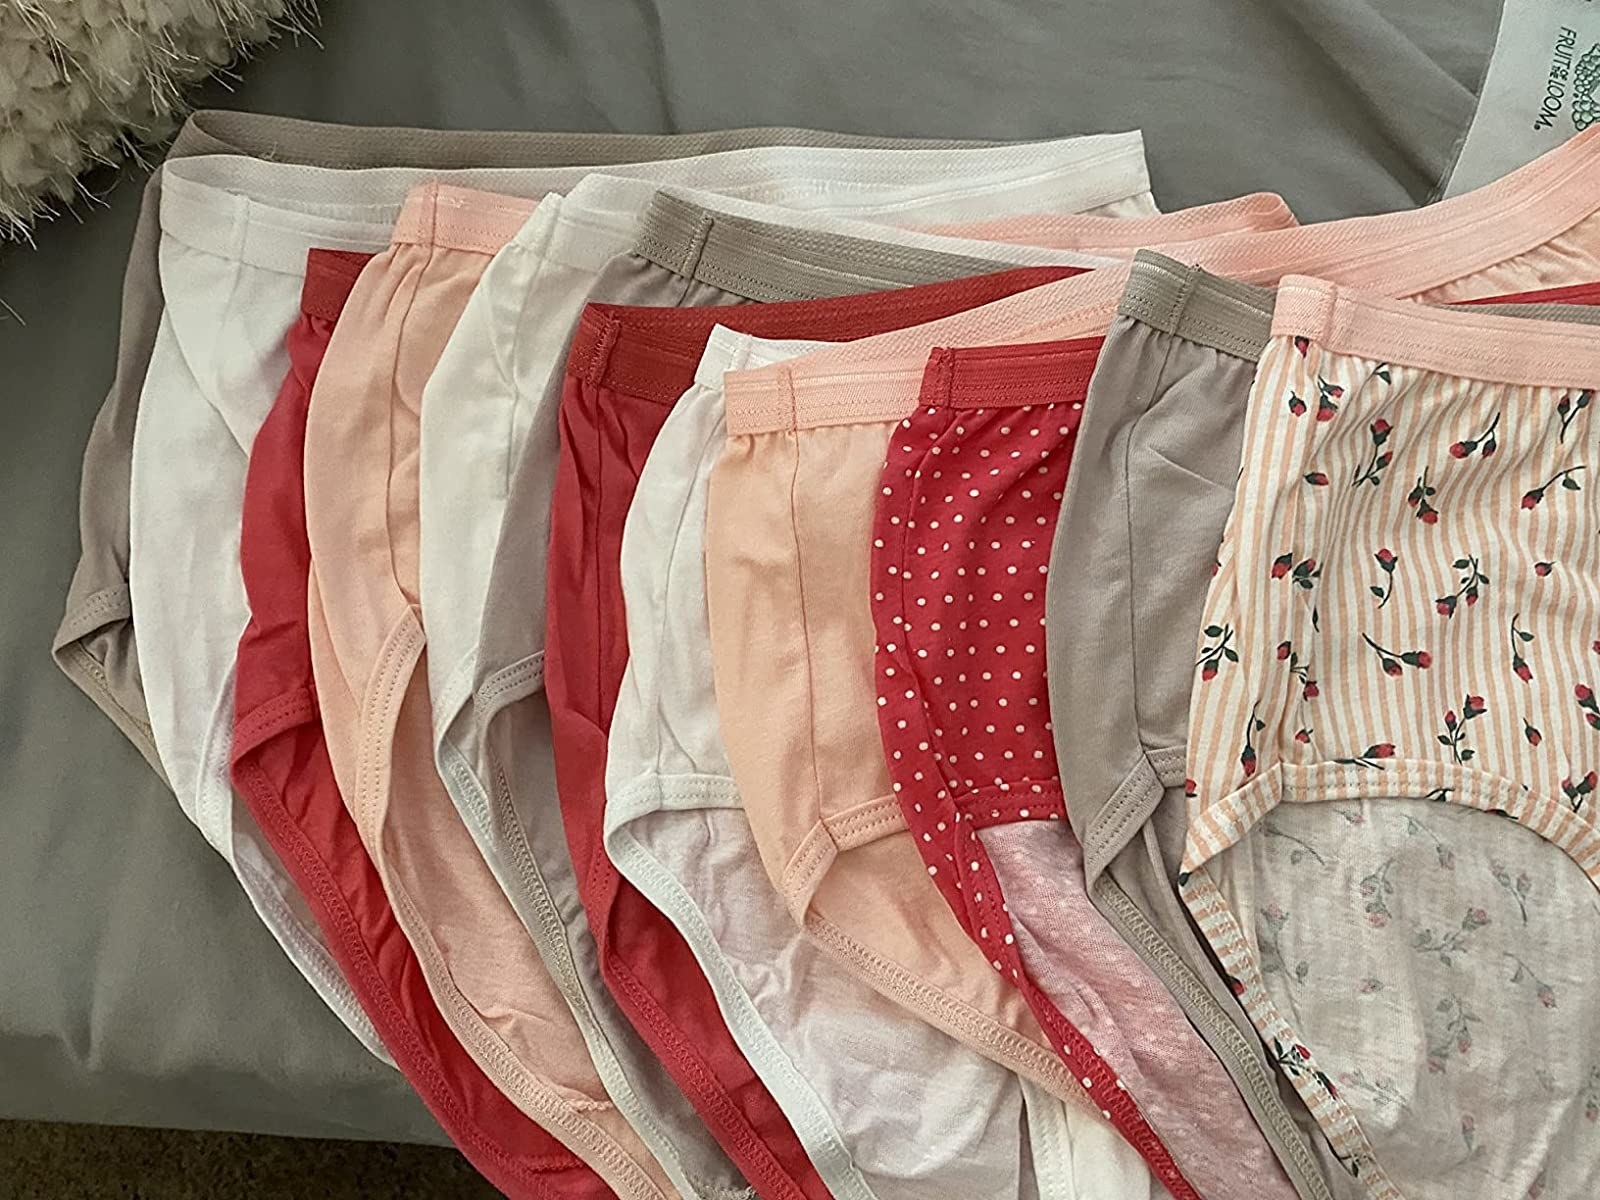 reviewer photo of white, pink, red, and patterned underwear laid out